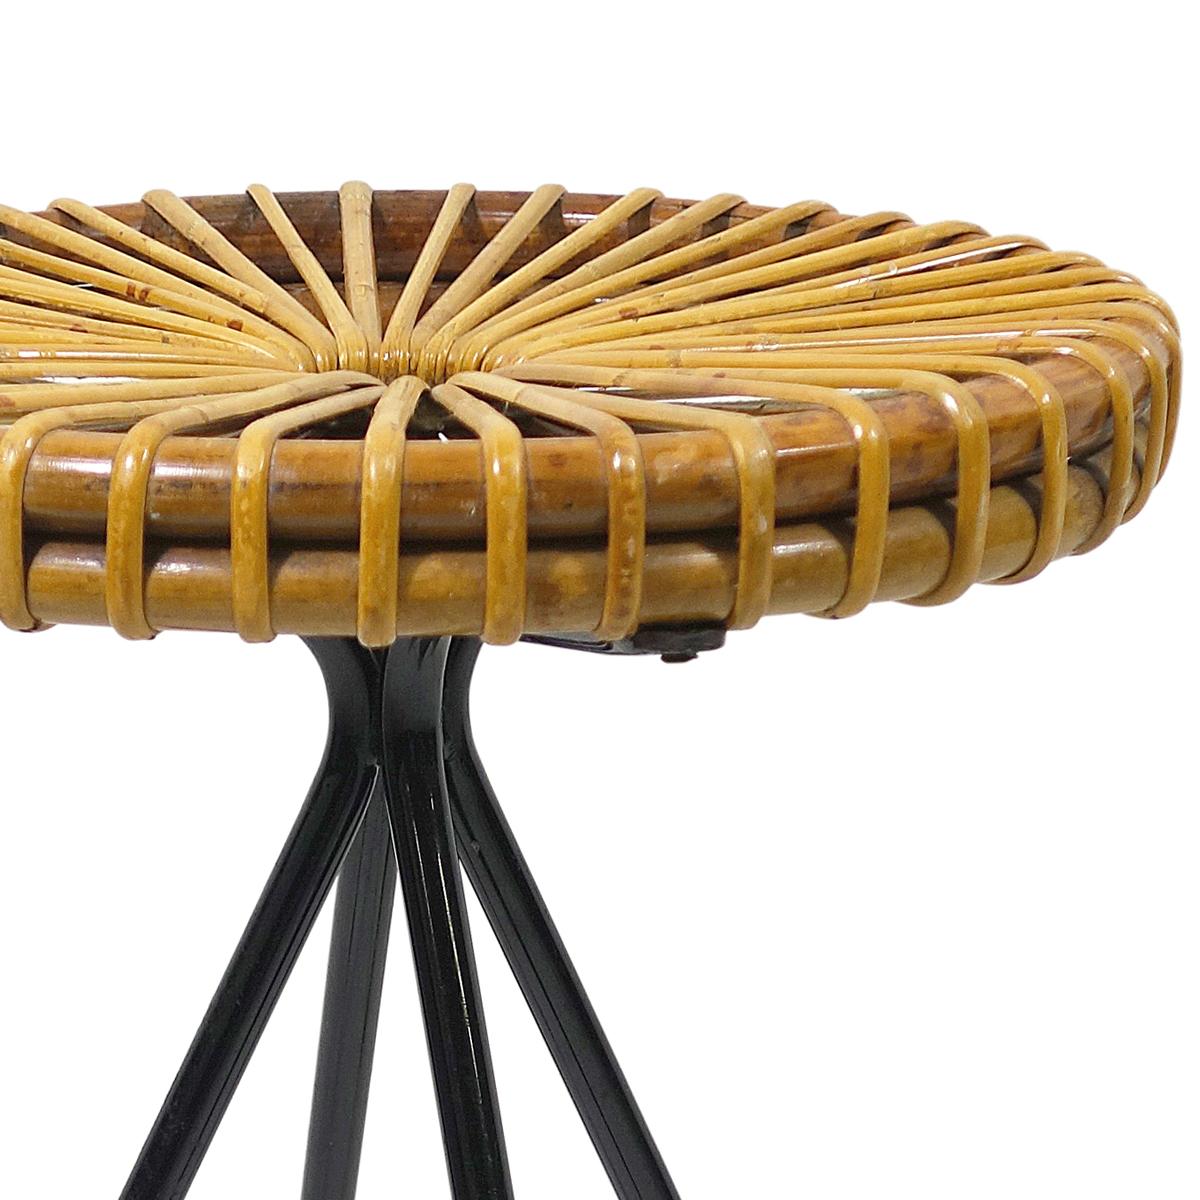 This stylish almost graphic stool has a black lacquered steel frame and a seat made of rattan. It was designed by Dirk van Sliedregt in the 1950s and still is a powerful eye catcher today. Moreover it is remarkably comfortable to sit at.